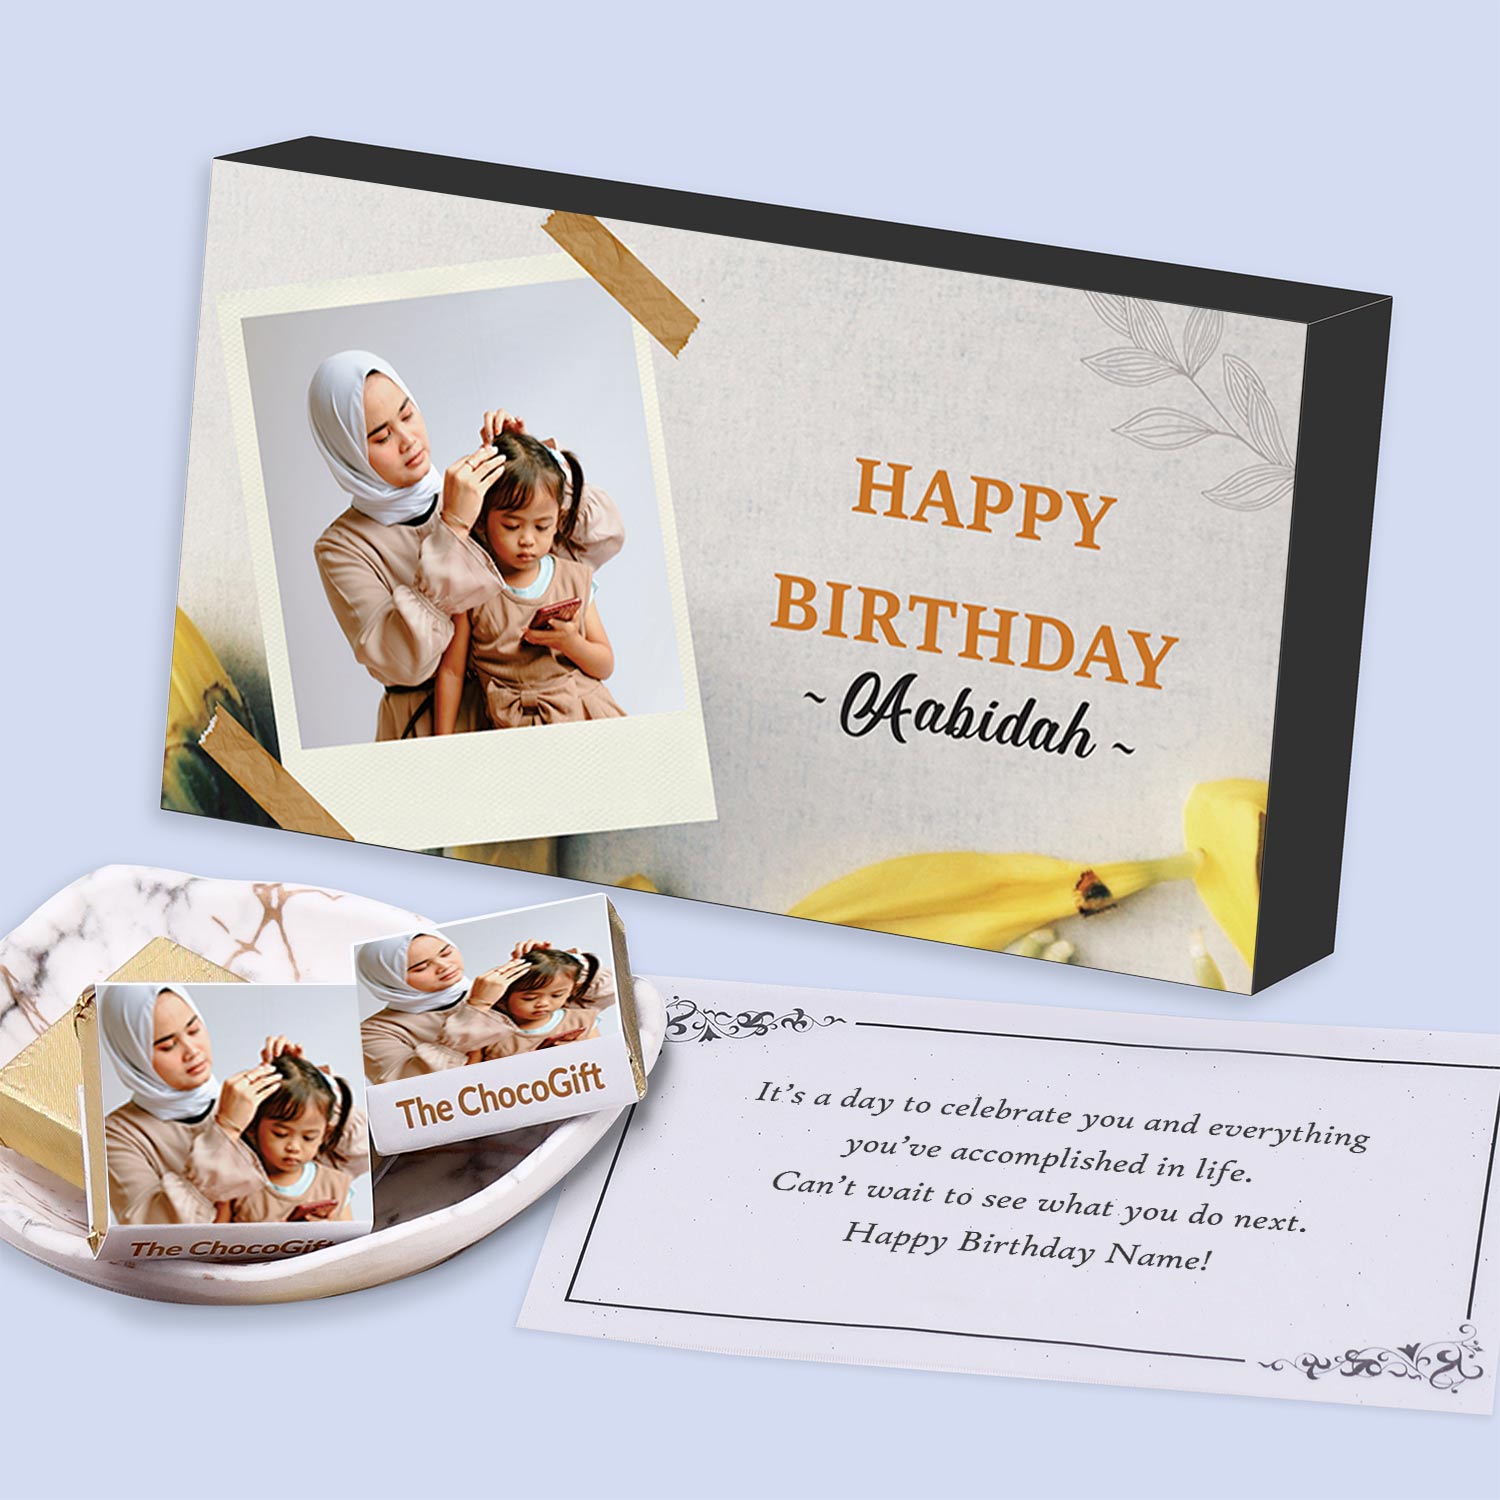 Personalised/Customised Gifts Ideas Online in India - MyFlowerTree